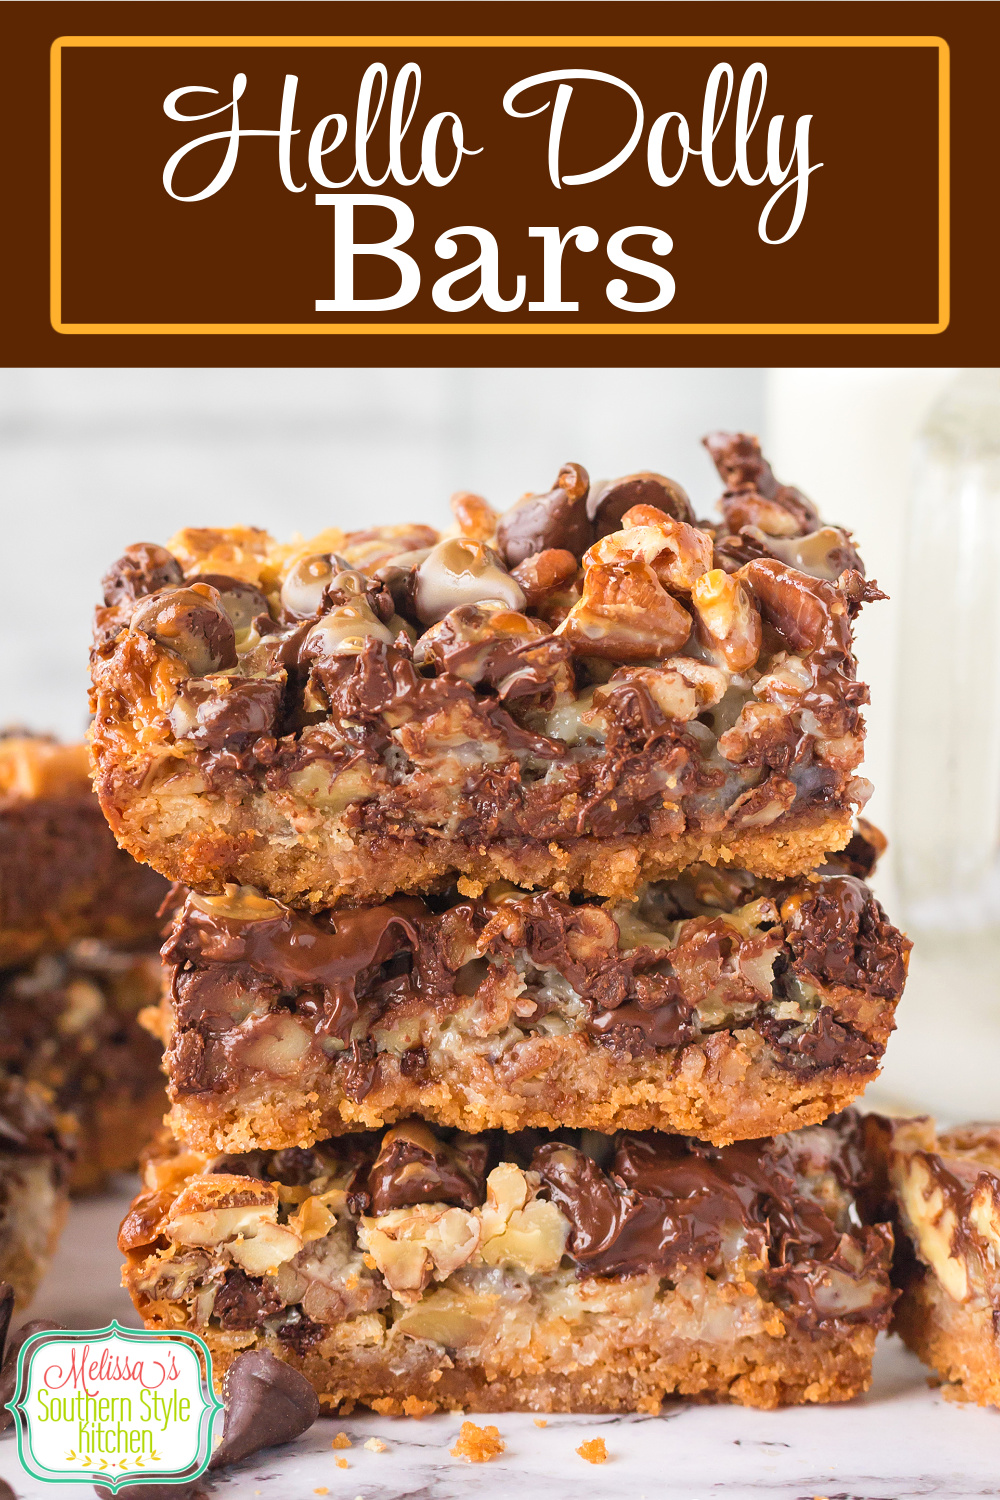 These scrumptious Hello Dolly Bars a.k.a. Magic Cookie Bars are ideal for tailgating, summer picnics, game day snacking and the holidays. #hellodollybars #cookiebars #magiccookiebars #7layerbars #layeredcookiebars #superbowldesserts #summerdesserts